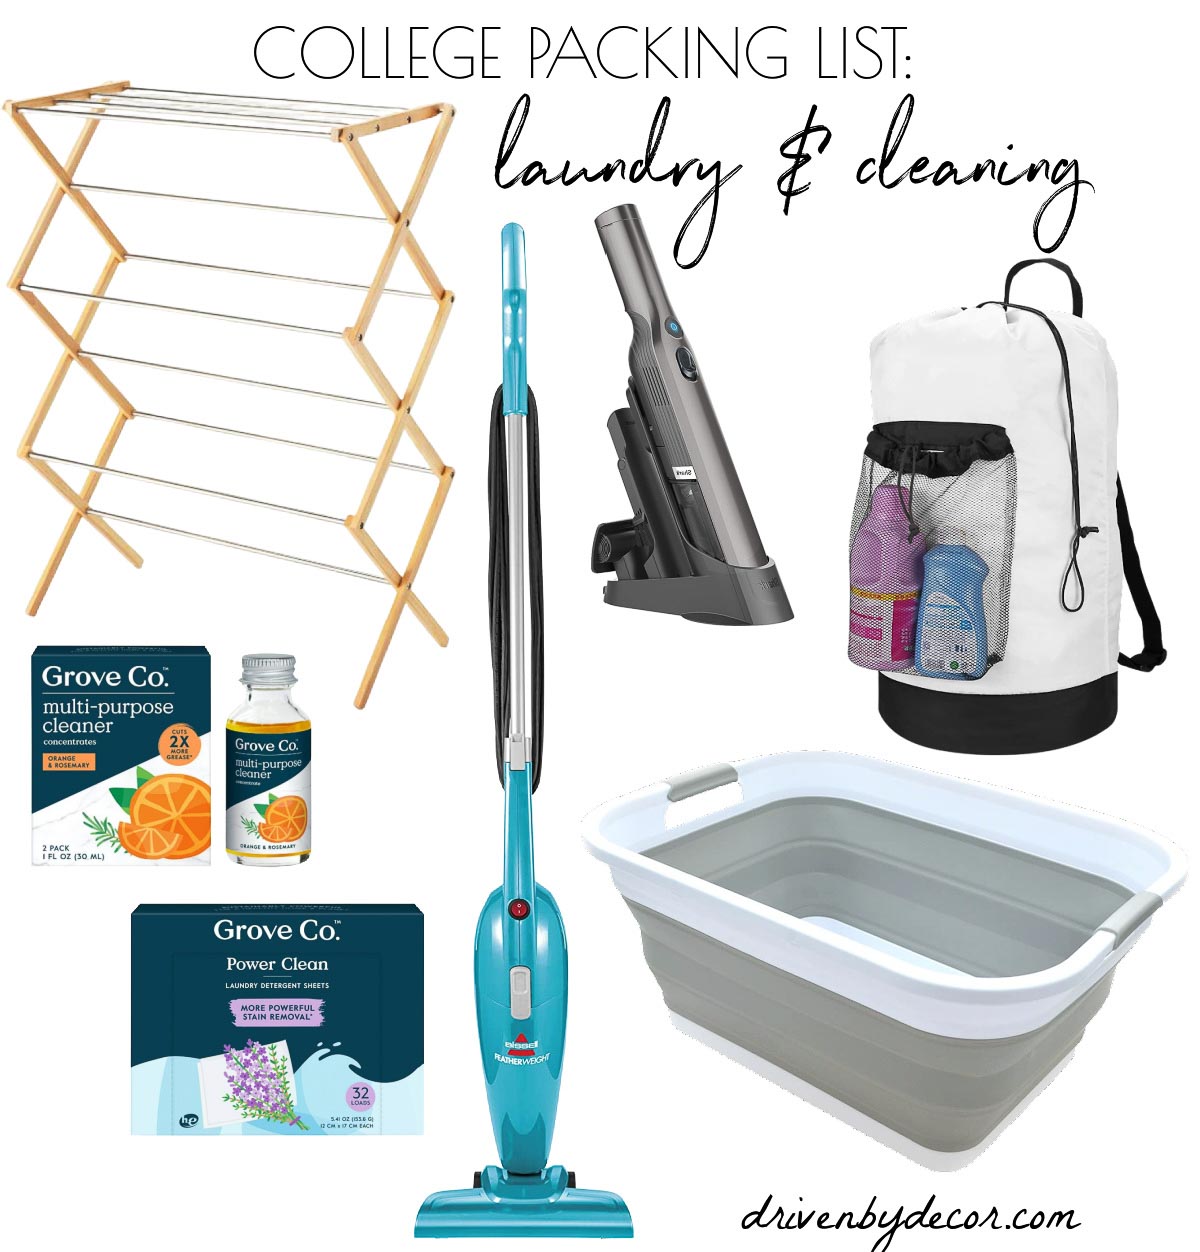 Laundry & cleaning items to add to your college packing list!